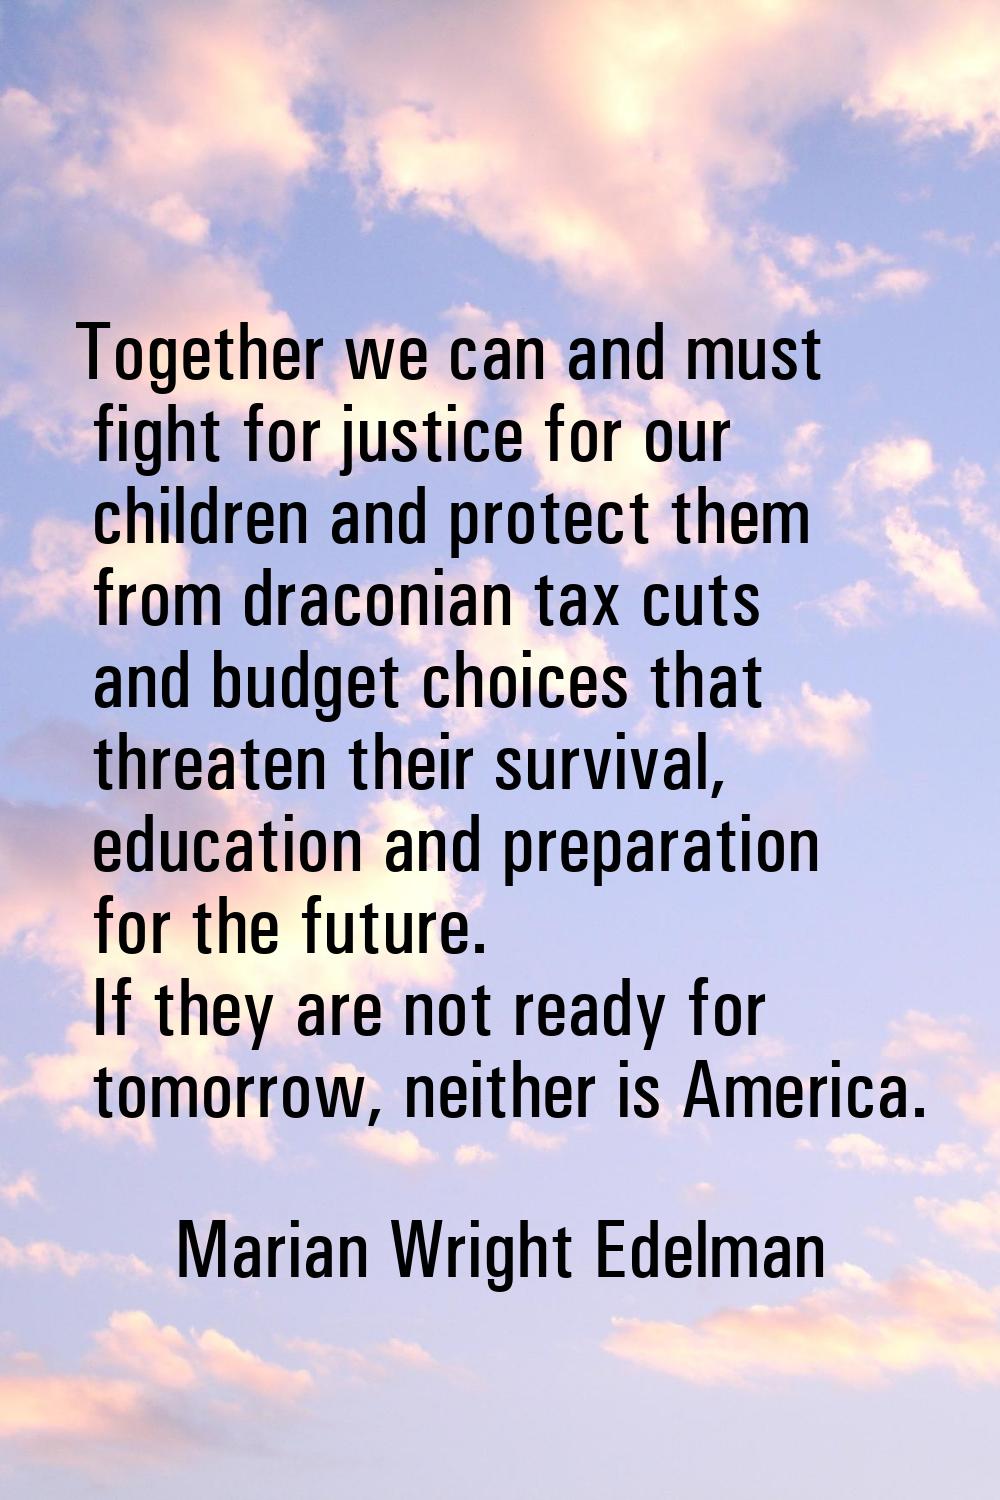 Together we can and must fight for justice for our children and protect them from draconian tax cut